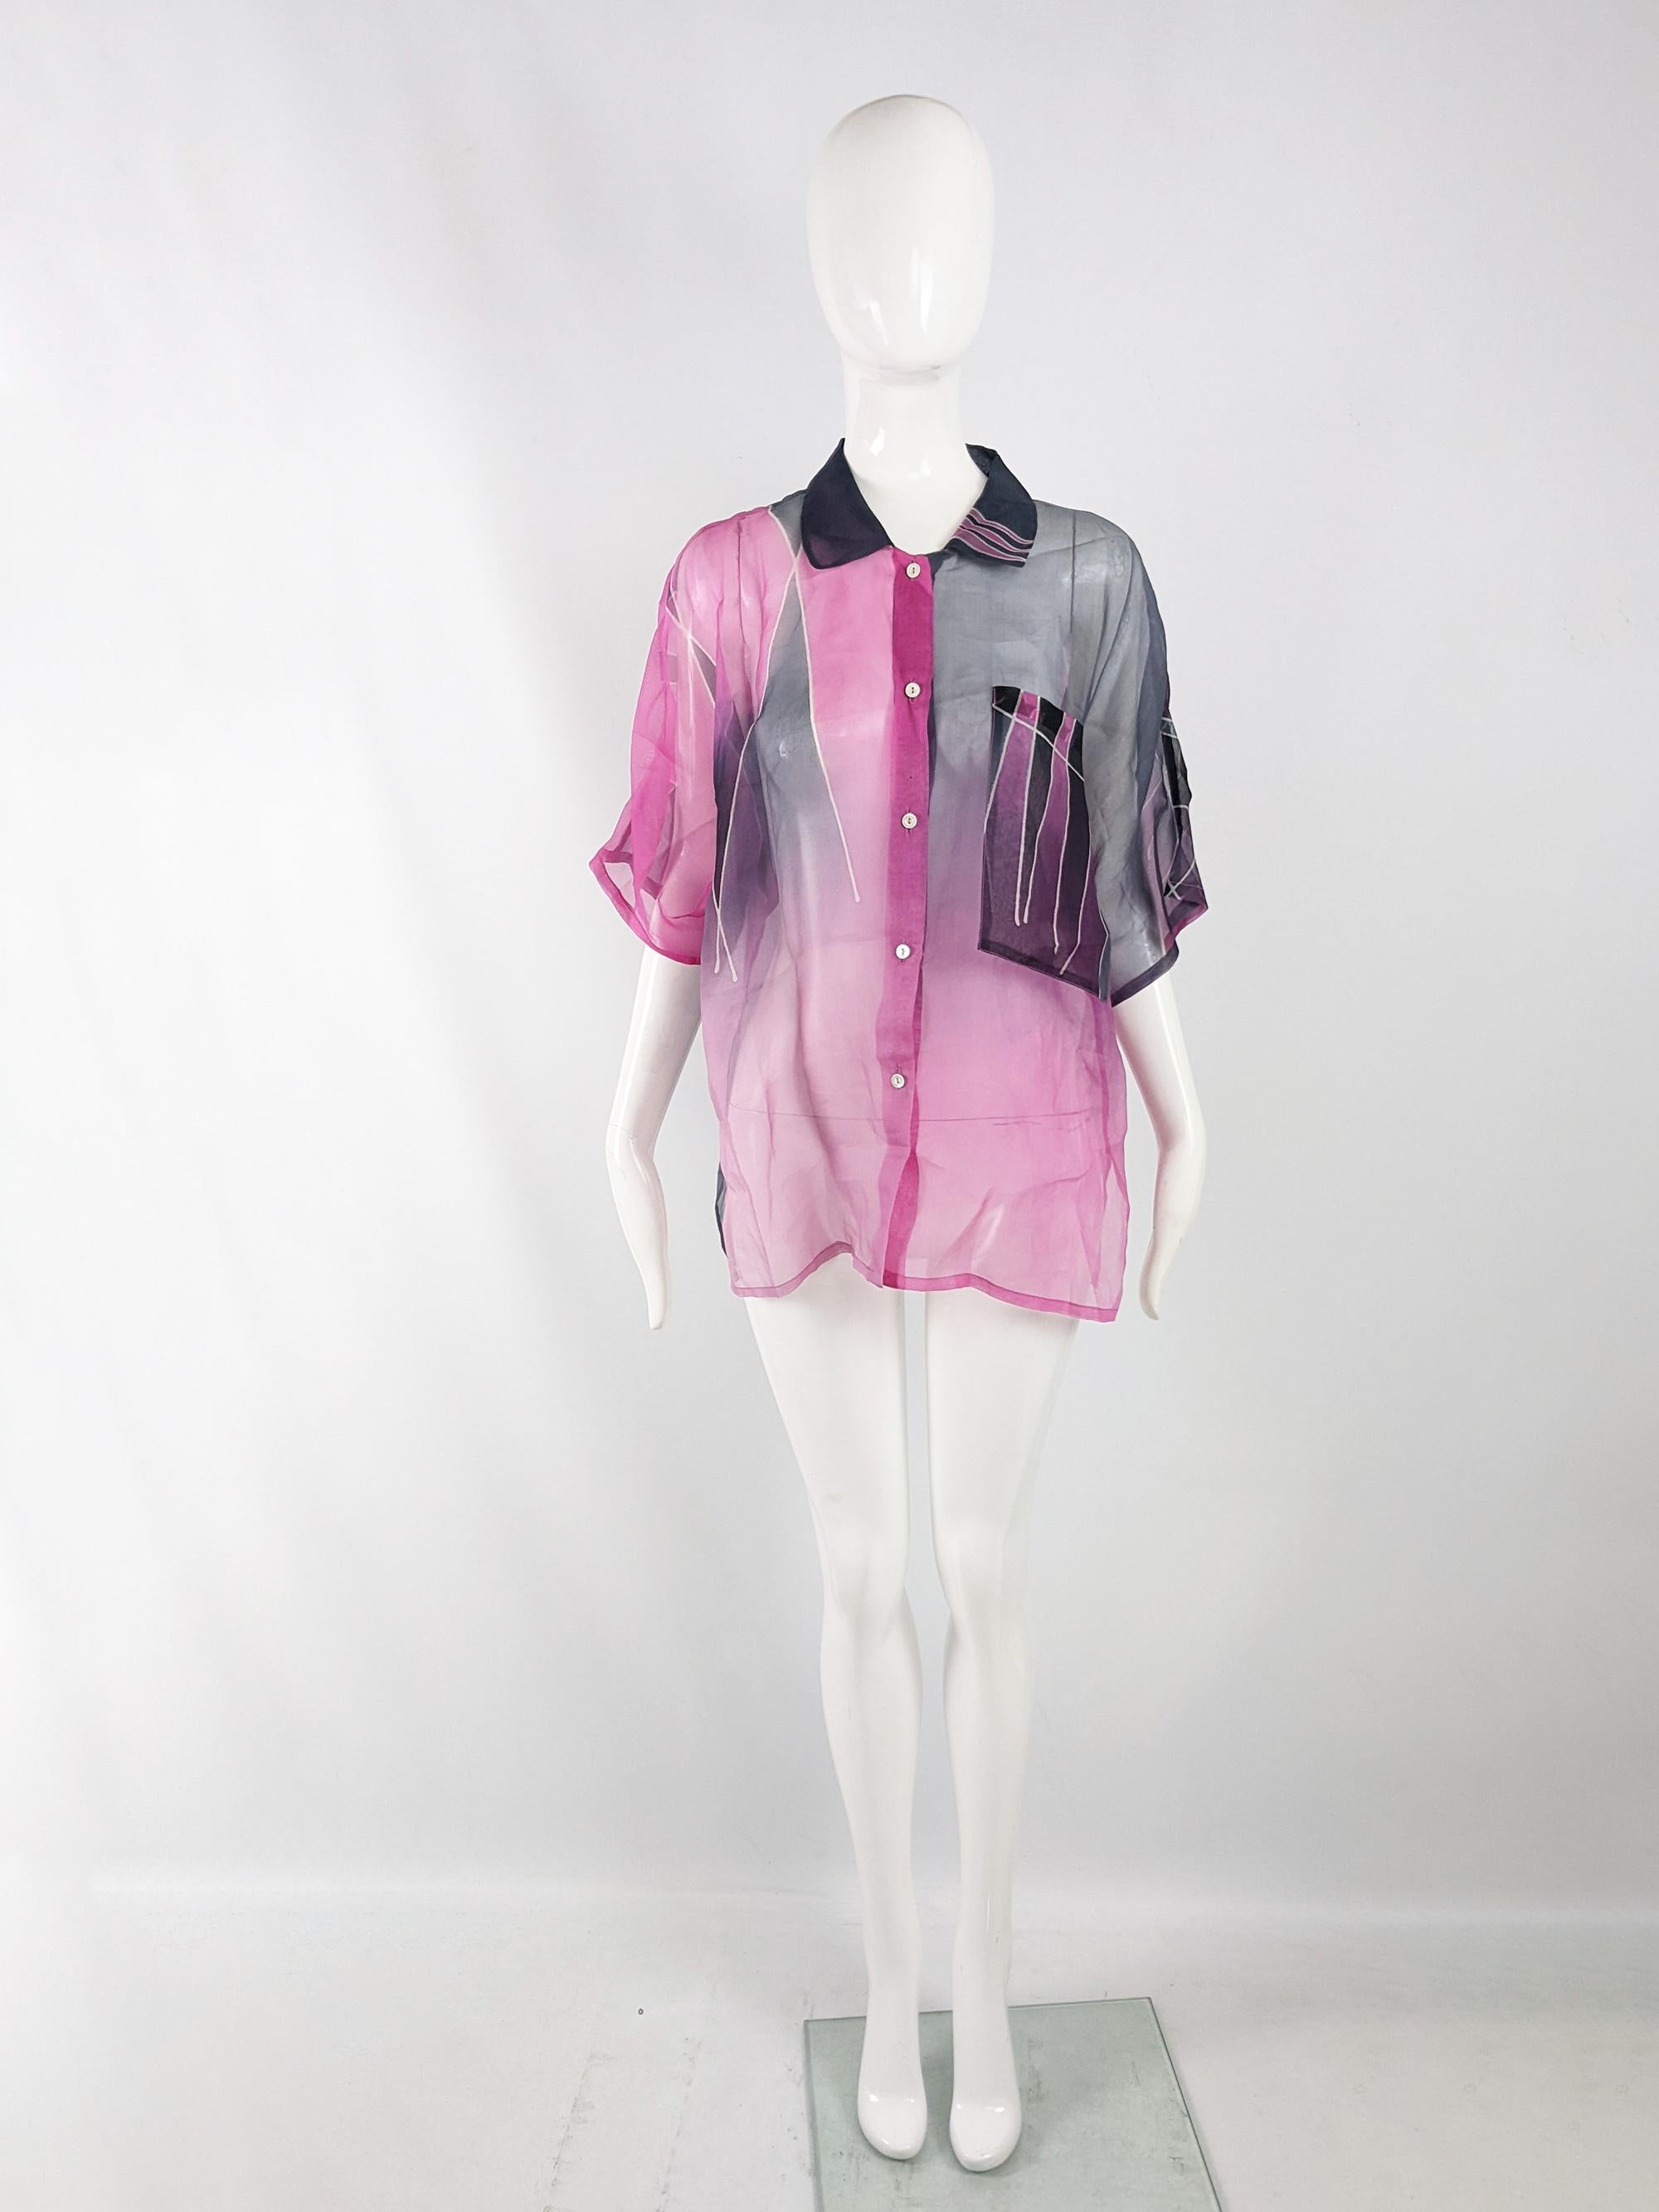 A fabulous and rare vintage womens pure silk blouse from the 80s by Judy Meyers. In a sheer silk fabric with a black and pink abstract print throughout. It has loose, oversized fit and short sleeves for a nonchalant, effortless look.

Size: